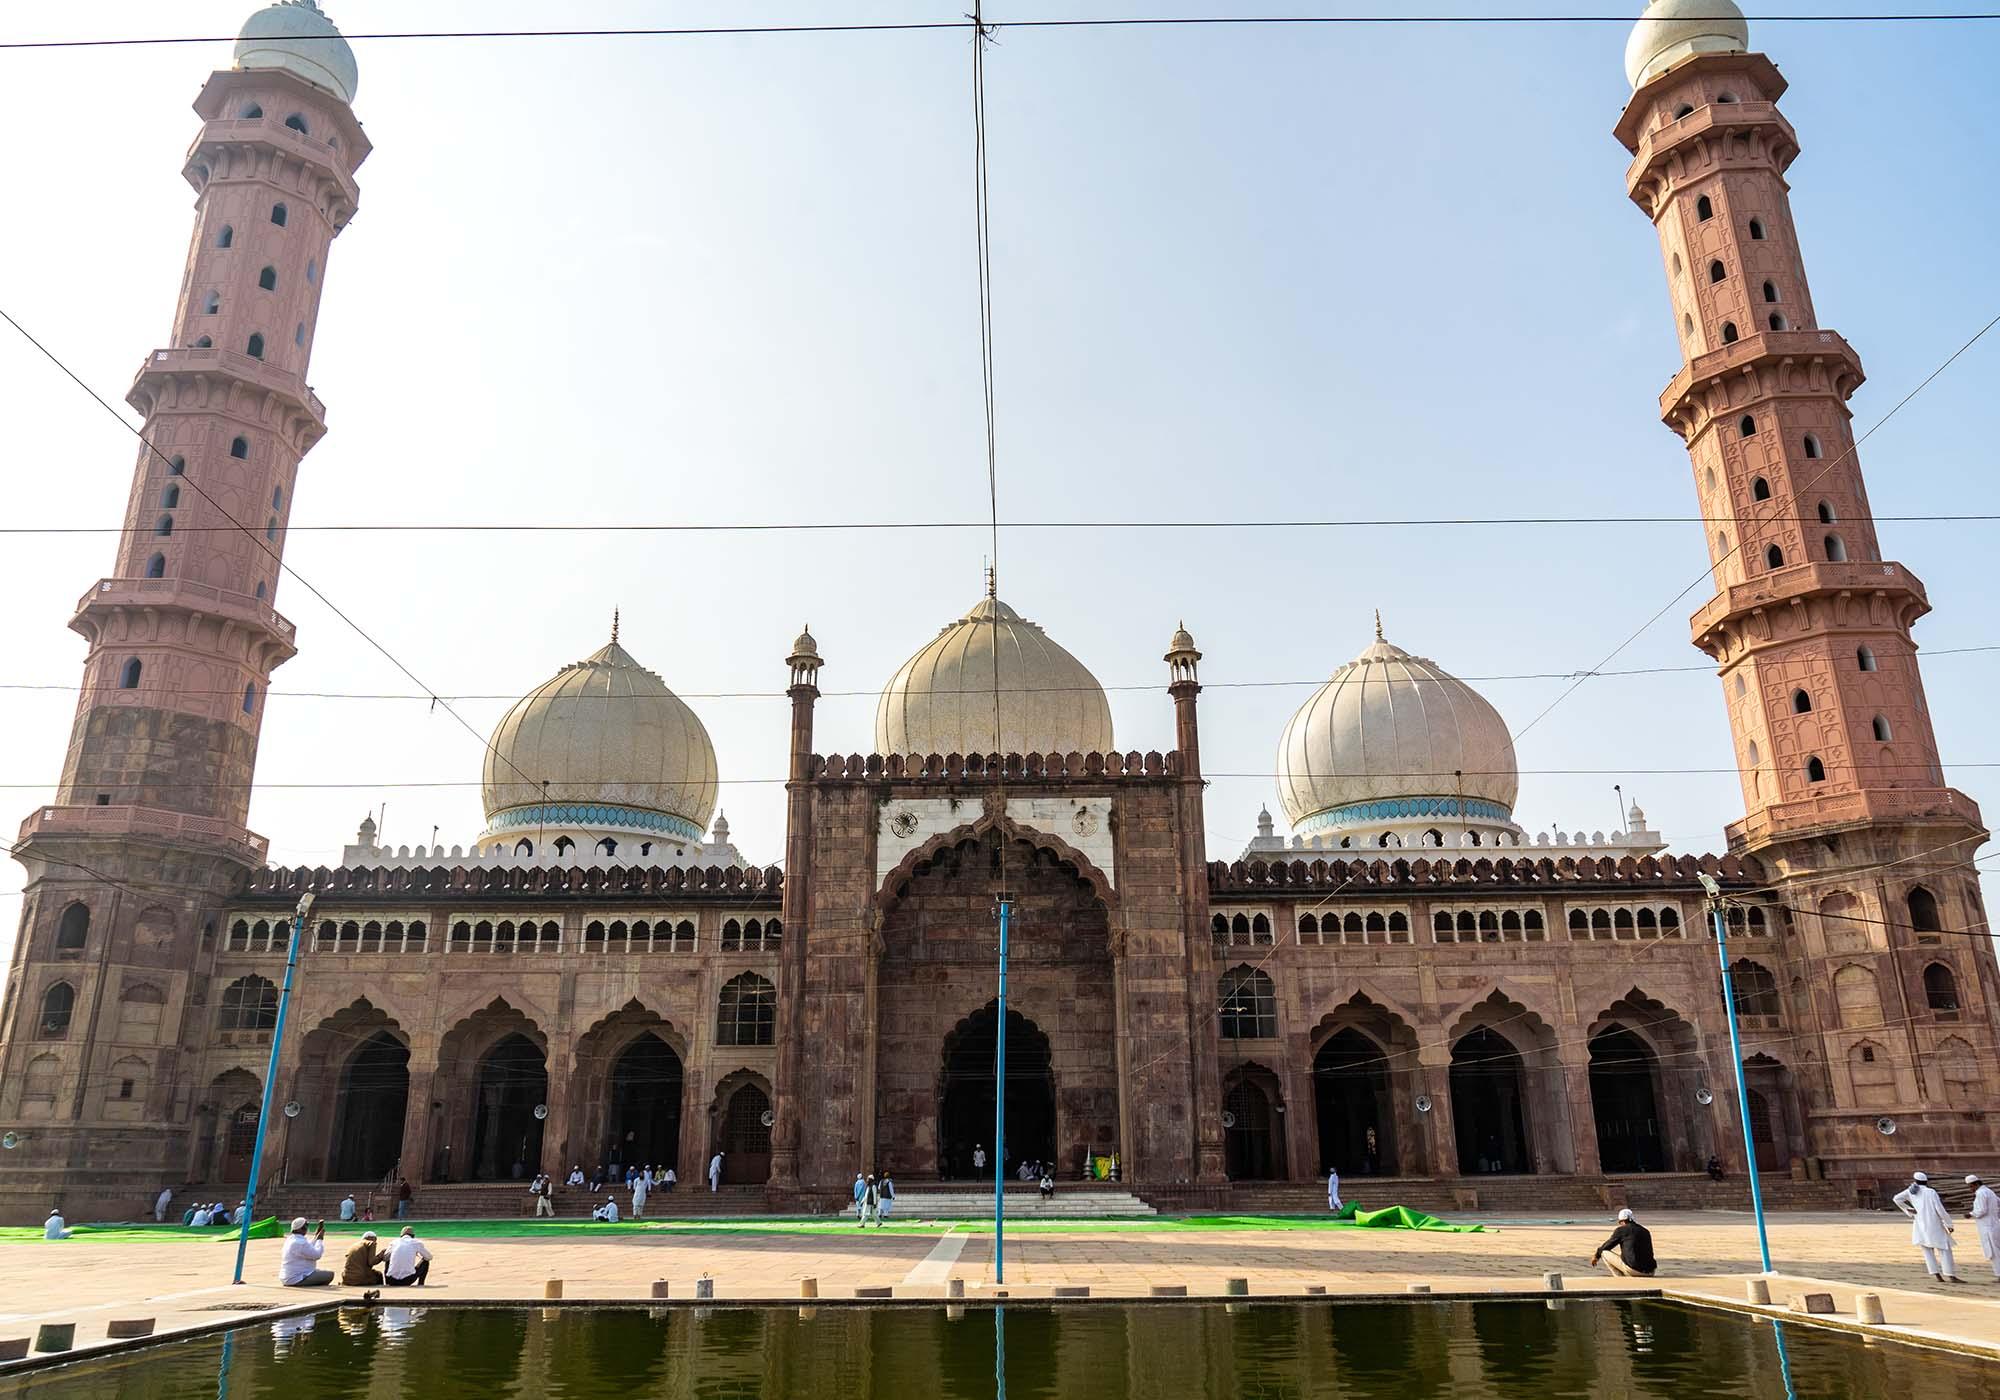 The main entrance to the Taj-ul-Masajid mosque, which is built with red sandstone and is one of the largest mosques in India. – © Michael Turtle